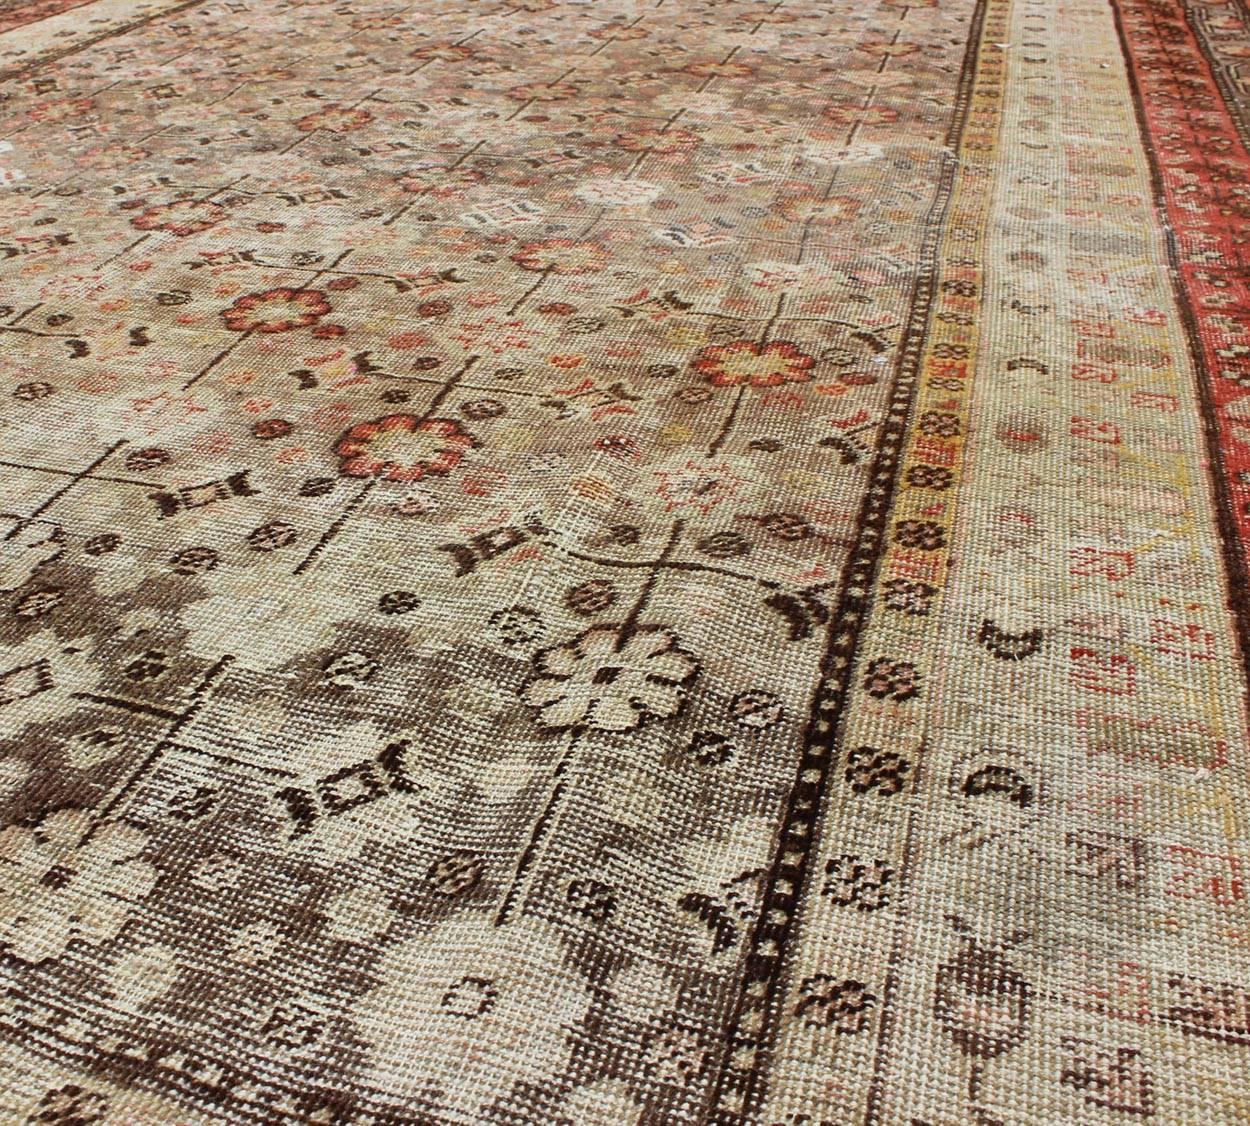 Exquisite Antique Khotan Rug with Intricate All-Over Sub-Geometric Floral Design In Fair Condition For Sale In Atlanta, GA